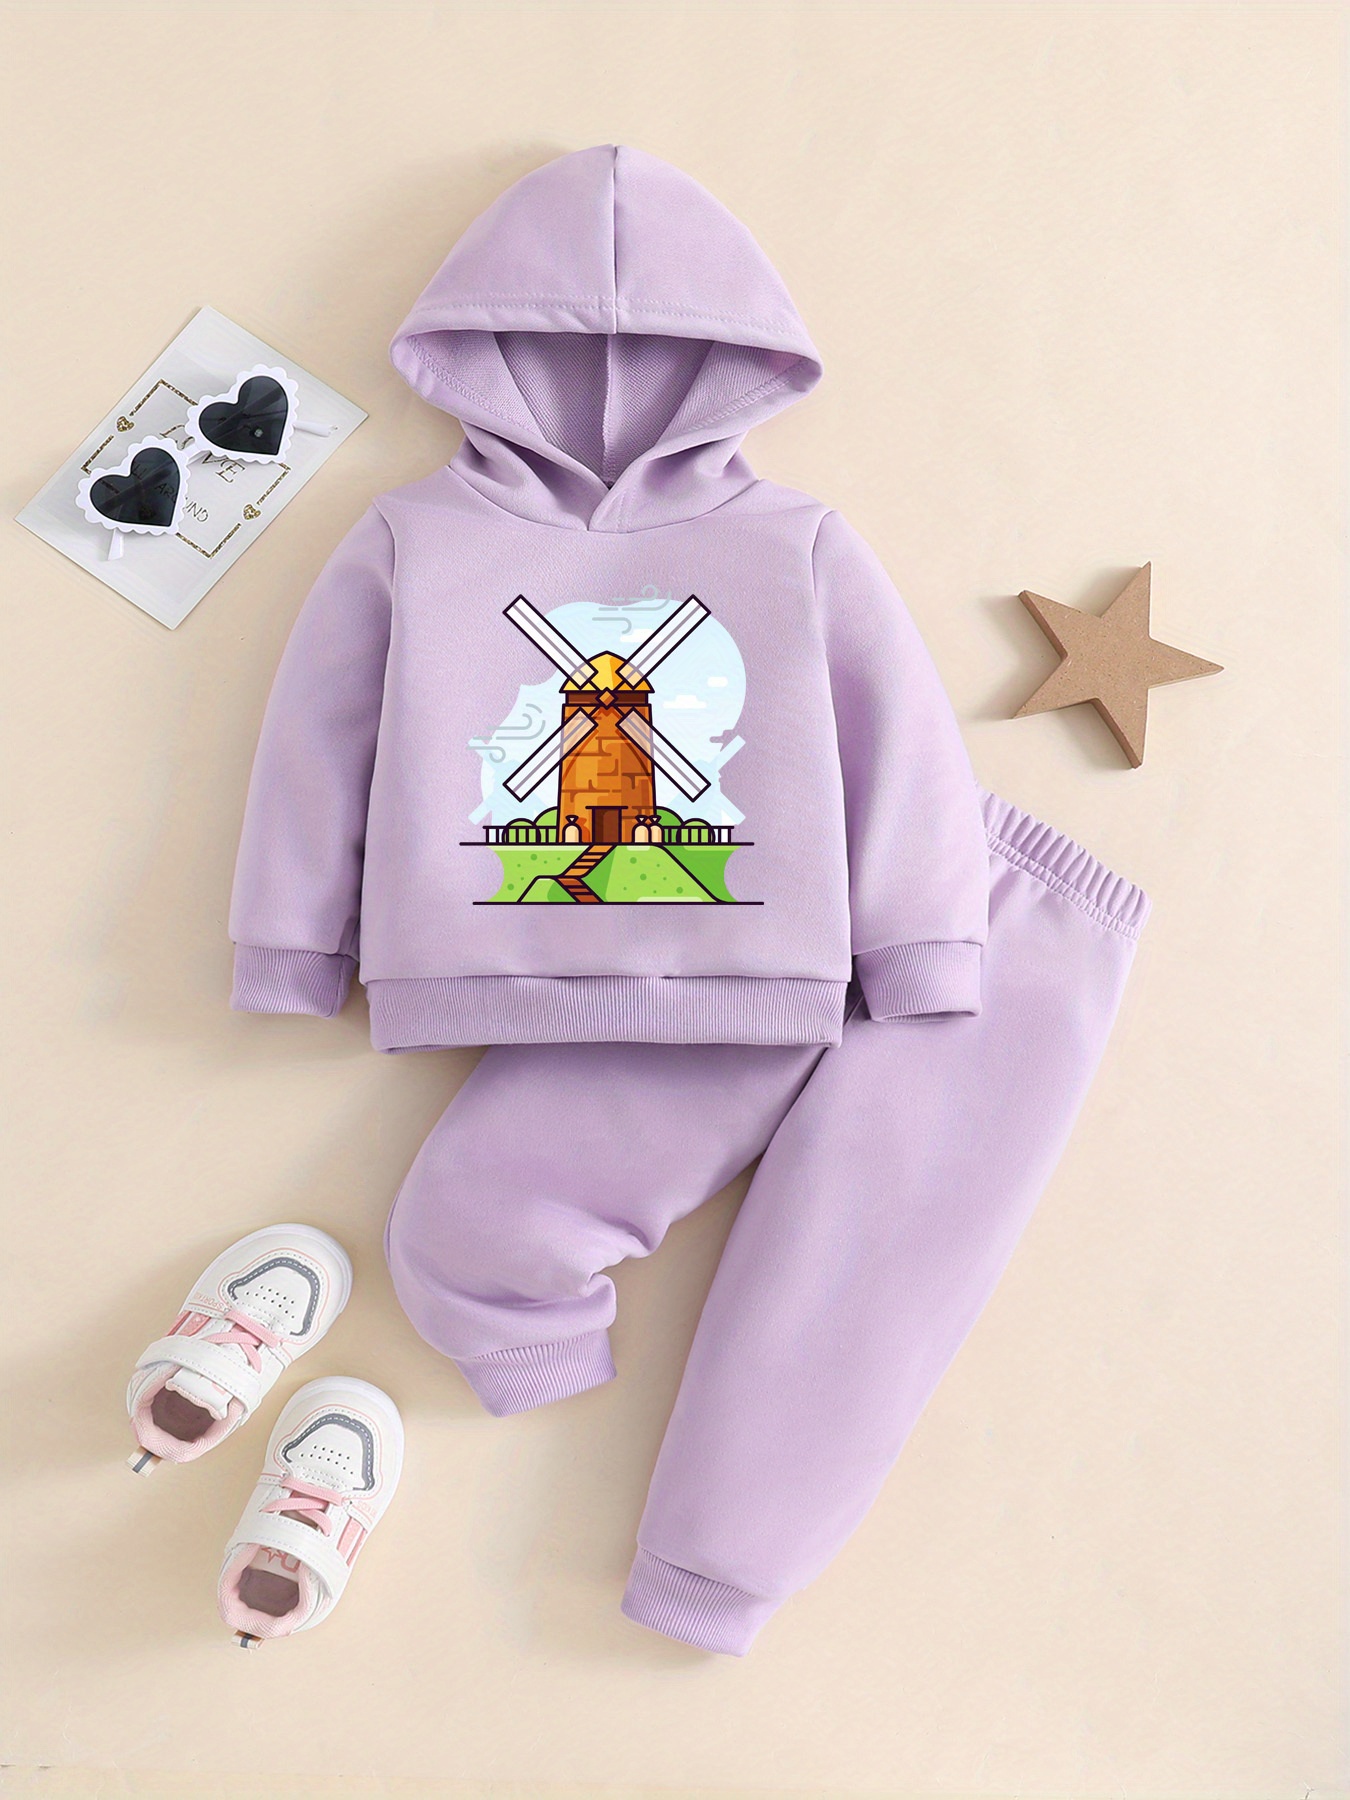 Creative Windmill Drawing Graphic Hoodie Trousers Set, Toddler